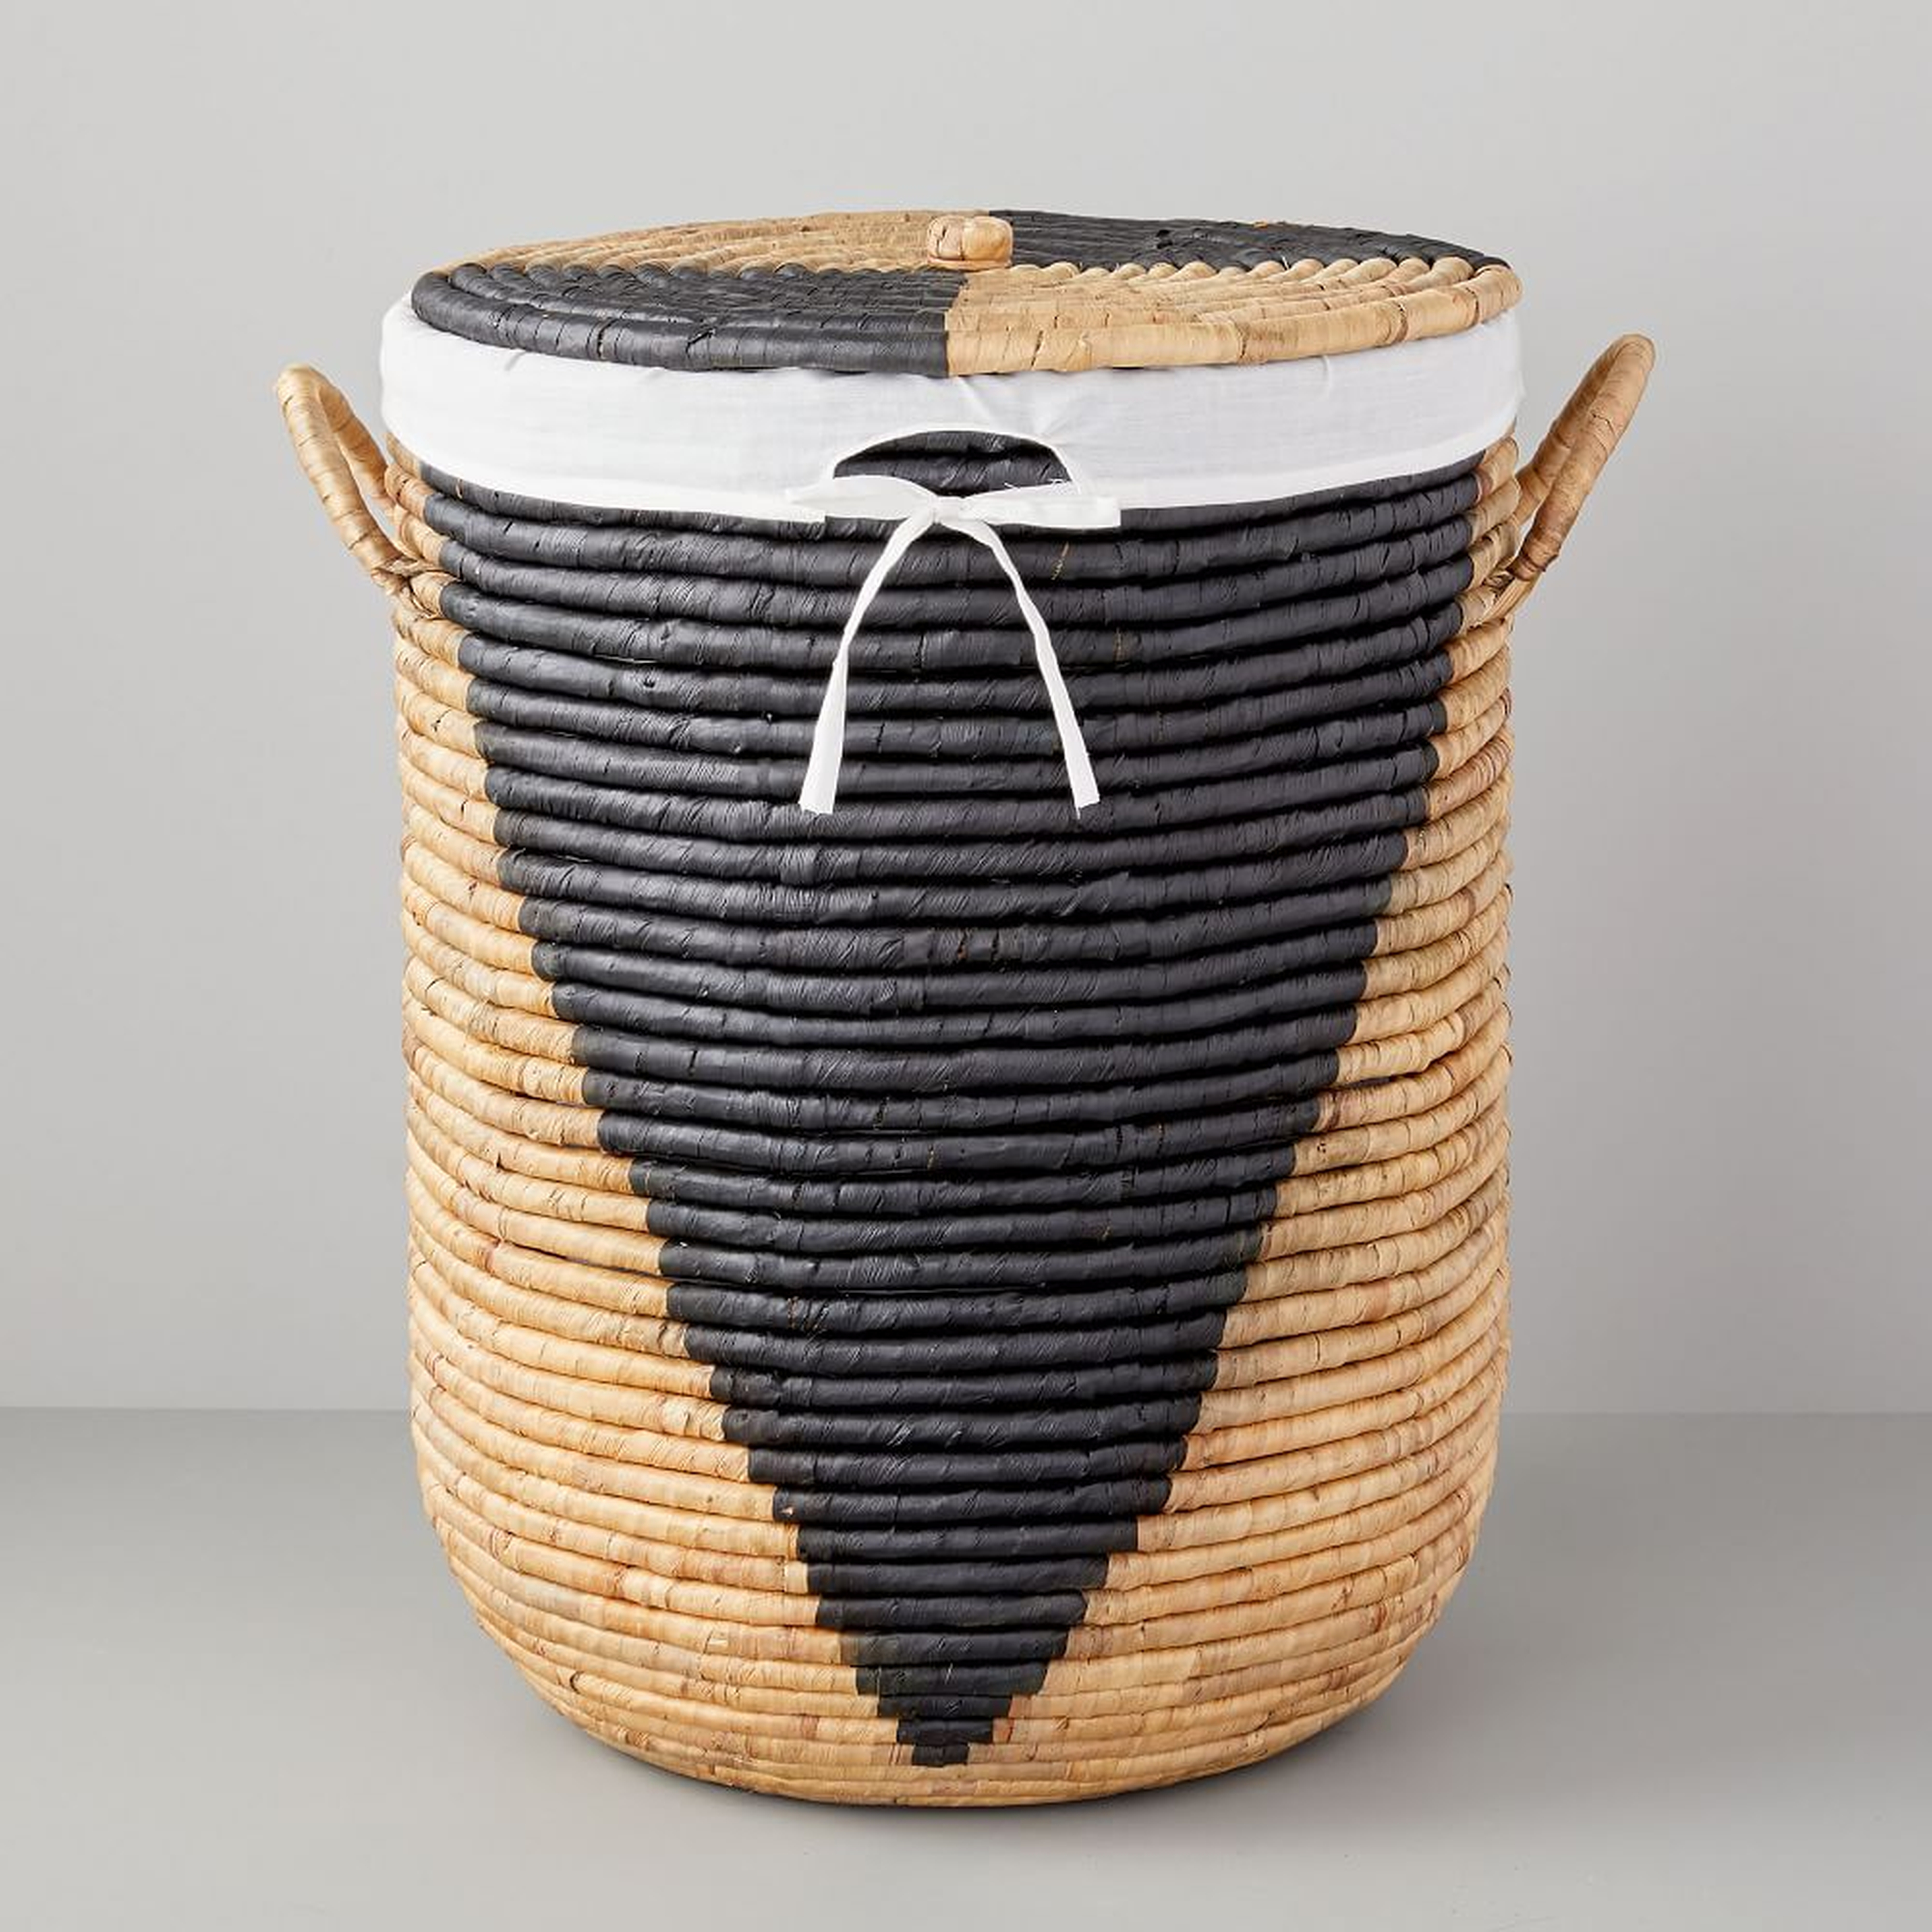 Woven Seagrass Hampers, Natural/Black, Large - West Elm